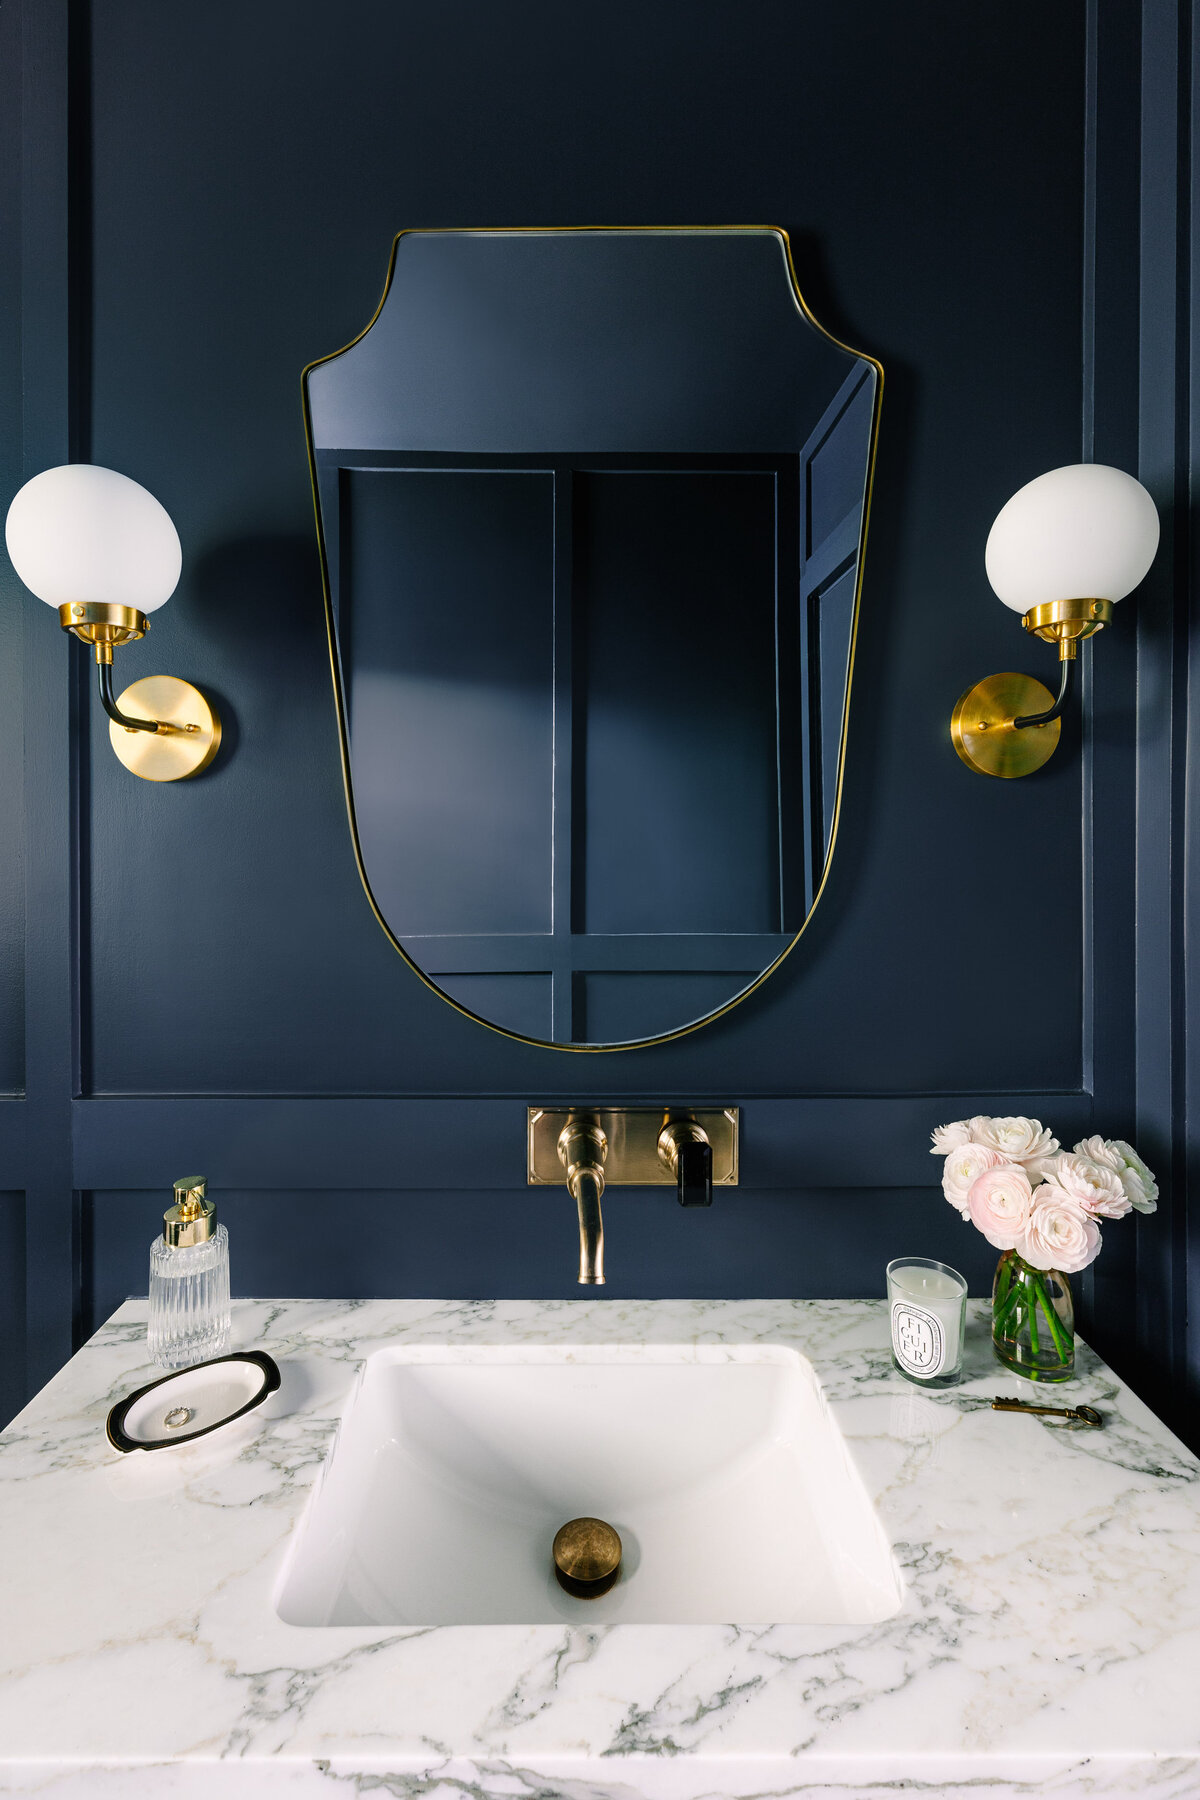 Elegant powder room with Farrow and Ball Hague Blue paneled walls and wall mounted faucet.